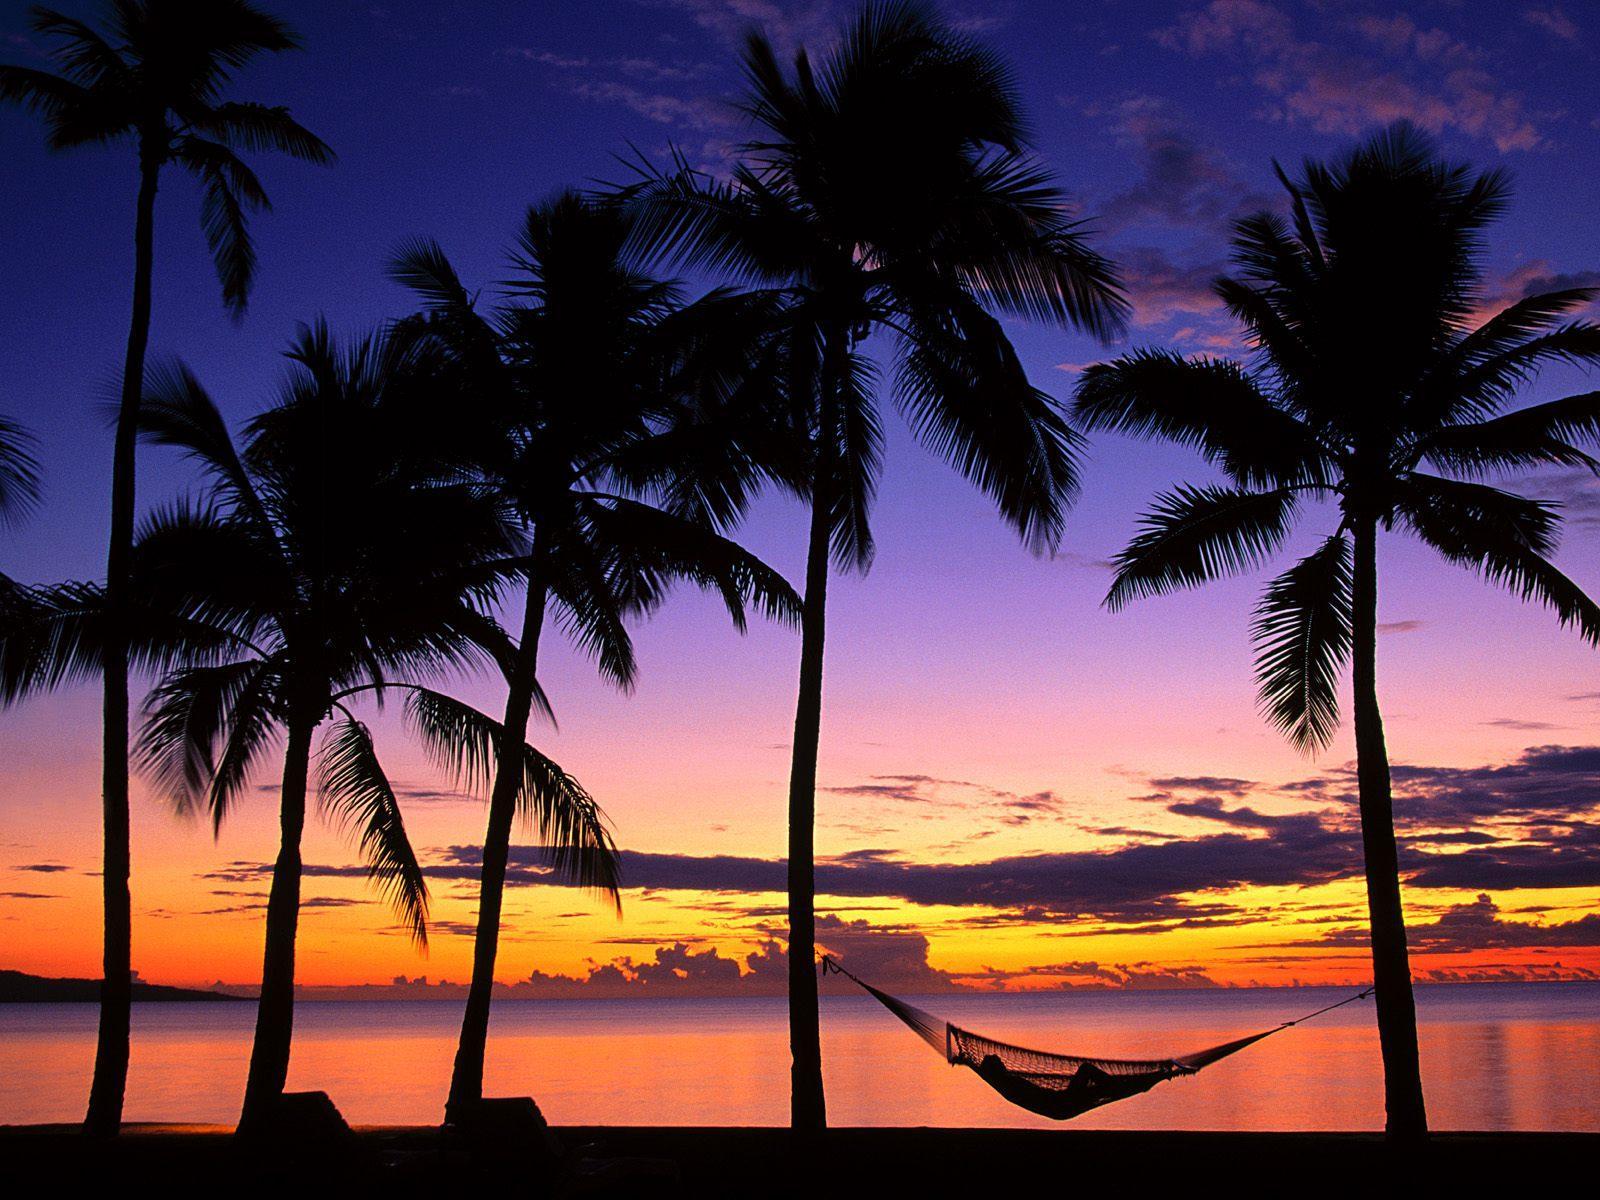 Beach Sunsets With Palm Trees 35888 HD Wallpaper in Beach n